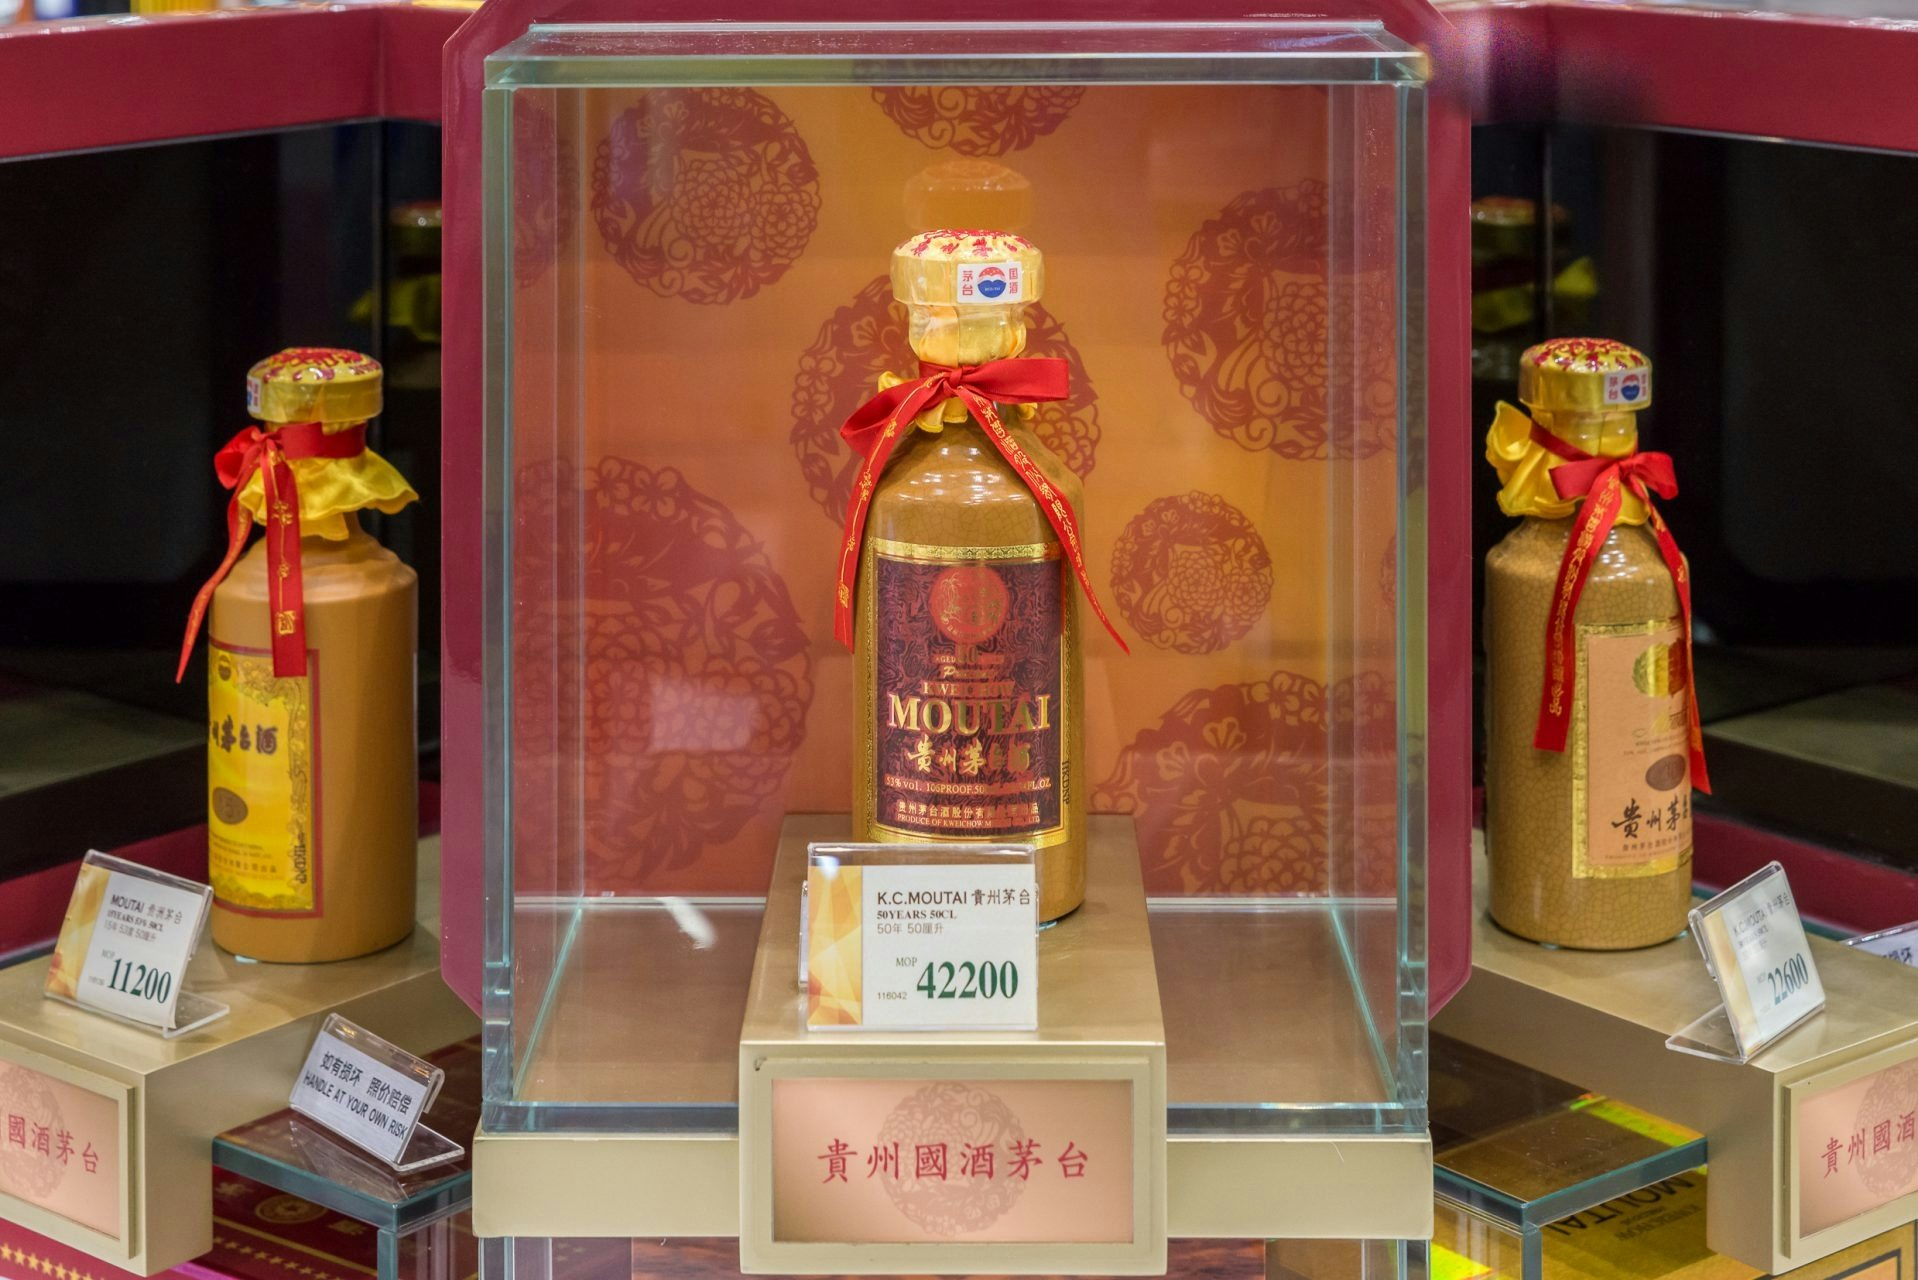 Maotai or Moutai is a high-end brand of baijiu. The producer, the state-run Kweichou Moutai Company, will likely be listed on the MSCI stock index. (Shutterstock)